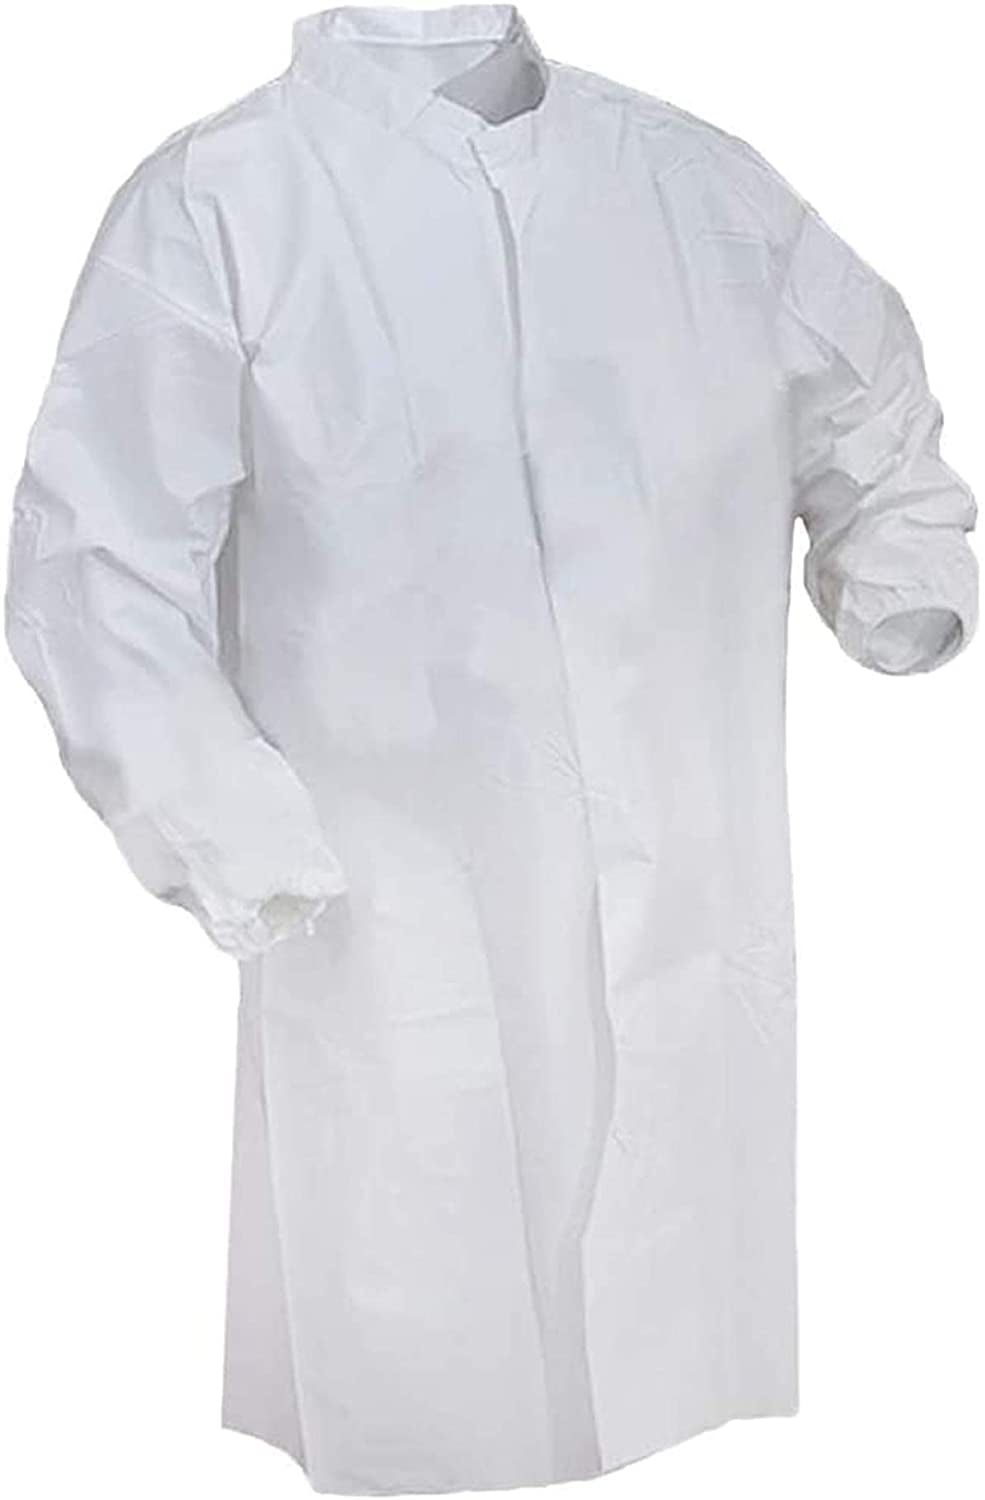 Kleenguard A20 Breathable Particle Protection Lab Coats Knee Length 4 Snap Closure 10019 White 25 / Case Medium 